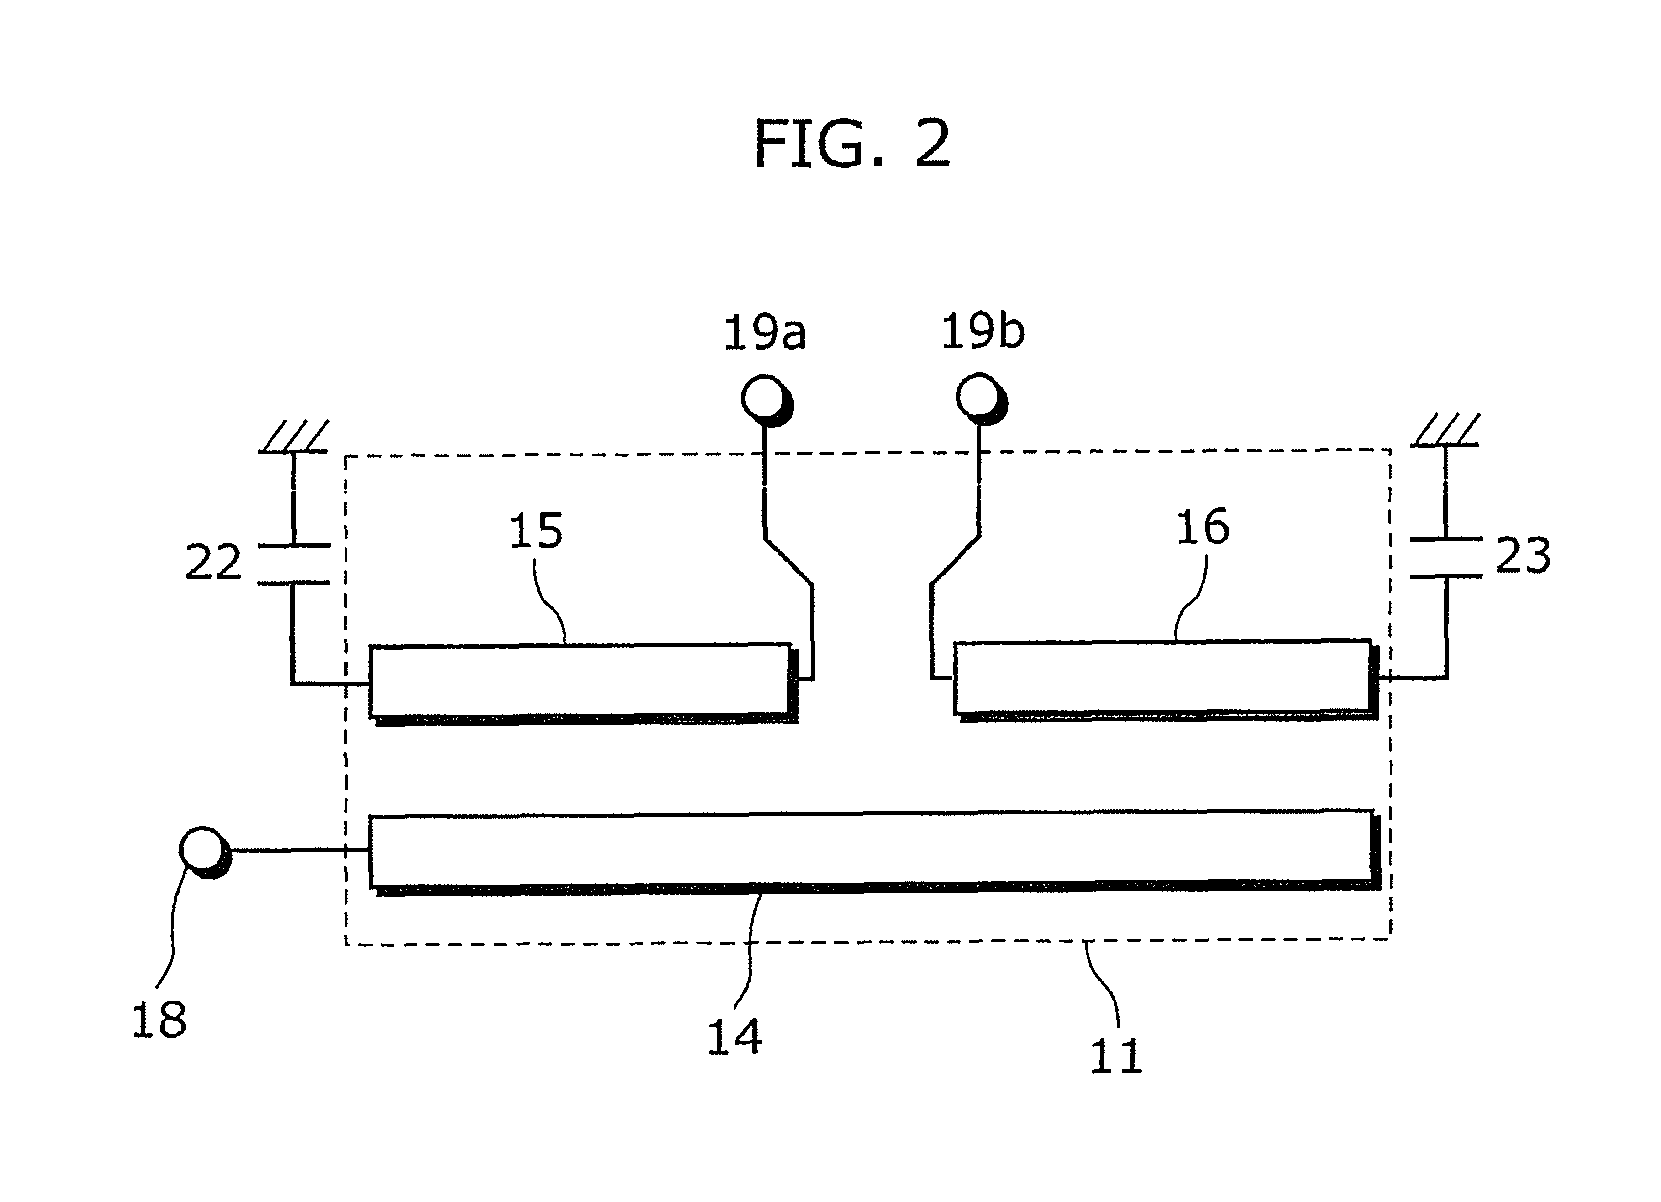 Semiconductor device with a balun